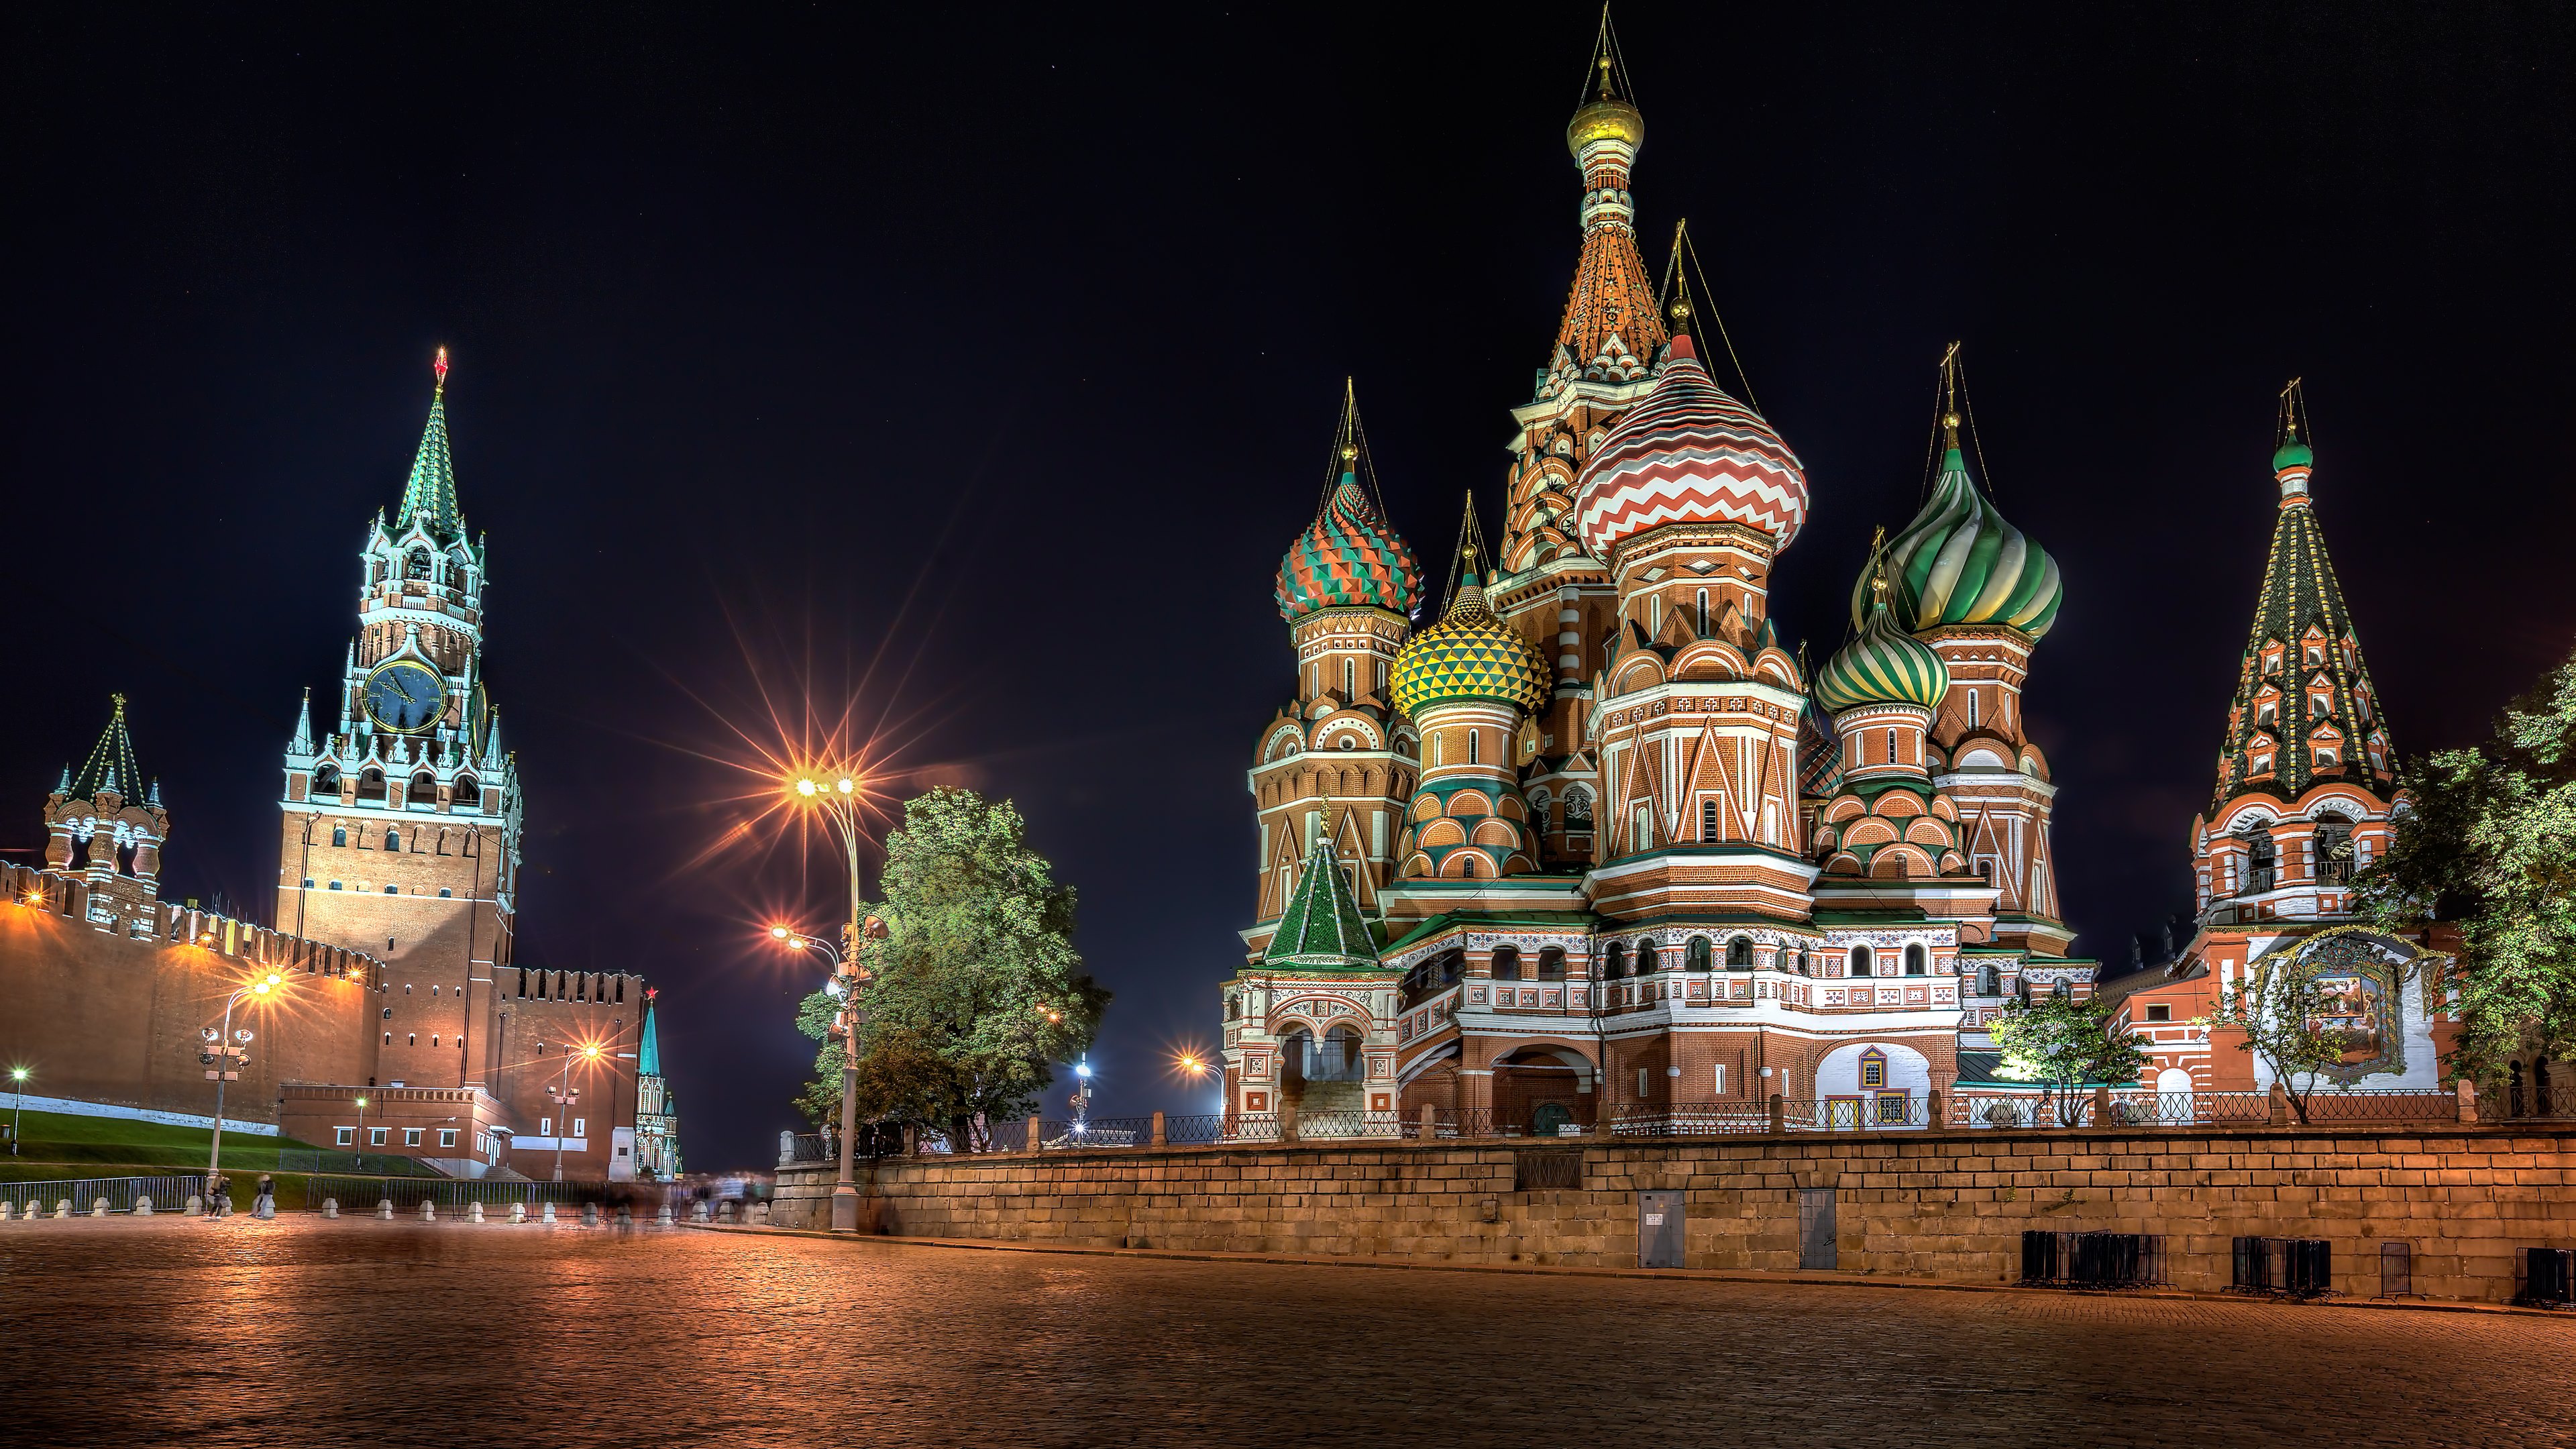 Religious Saint Basil's Cathedral 4k Ultra HD Wallpaper by Alex Poison